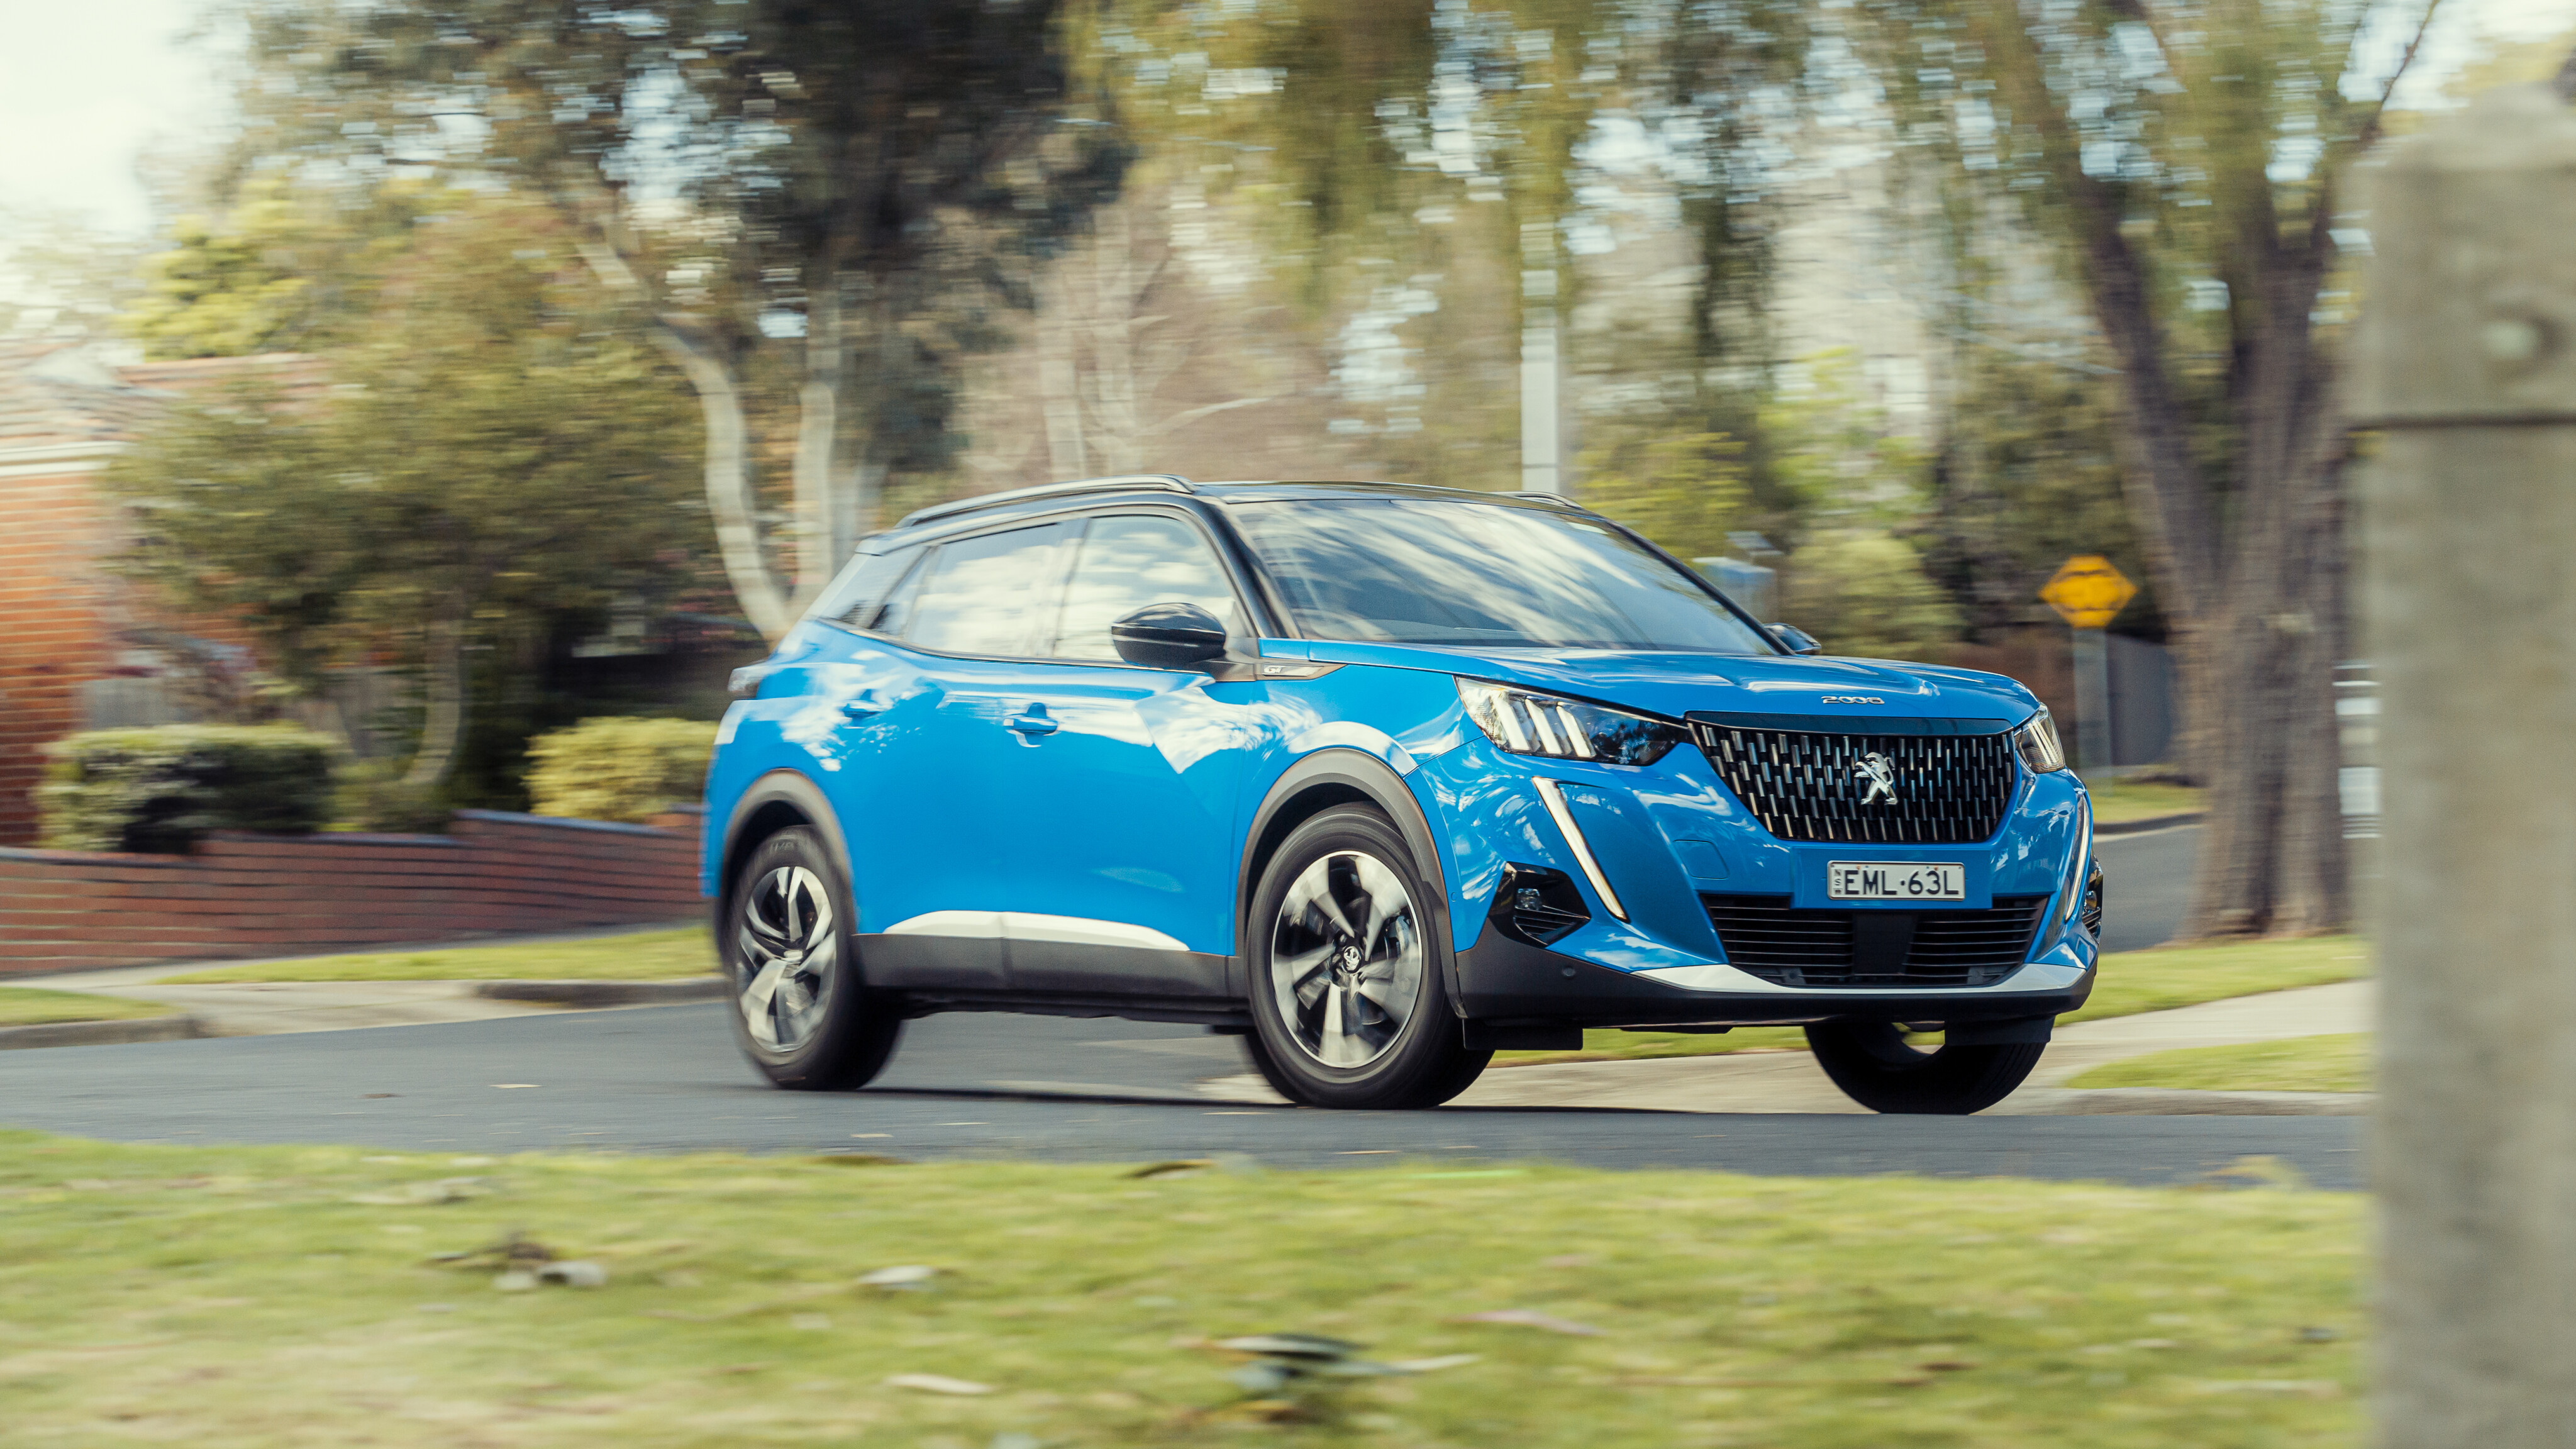 PEUGEOT 2008 is the South African Car Of The Year, Peugeot